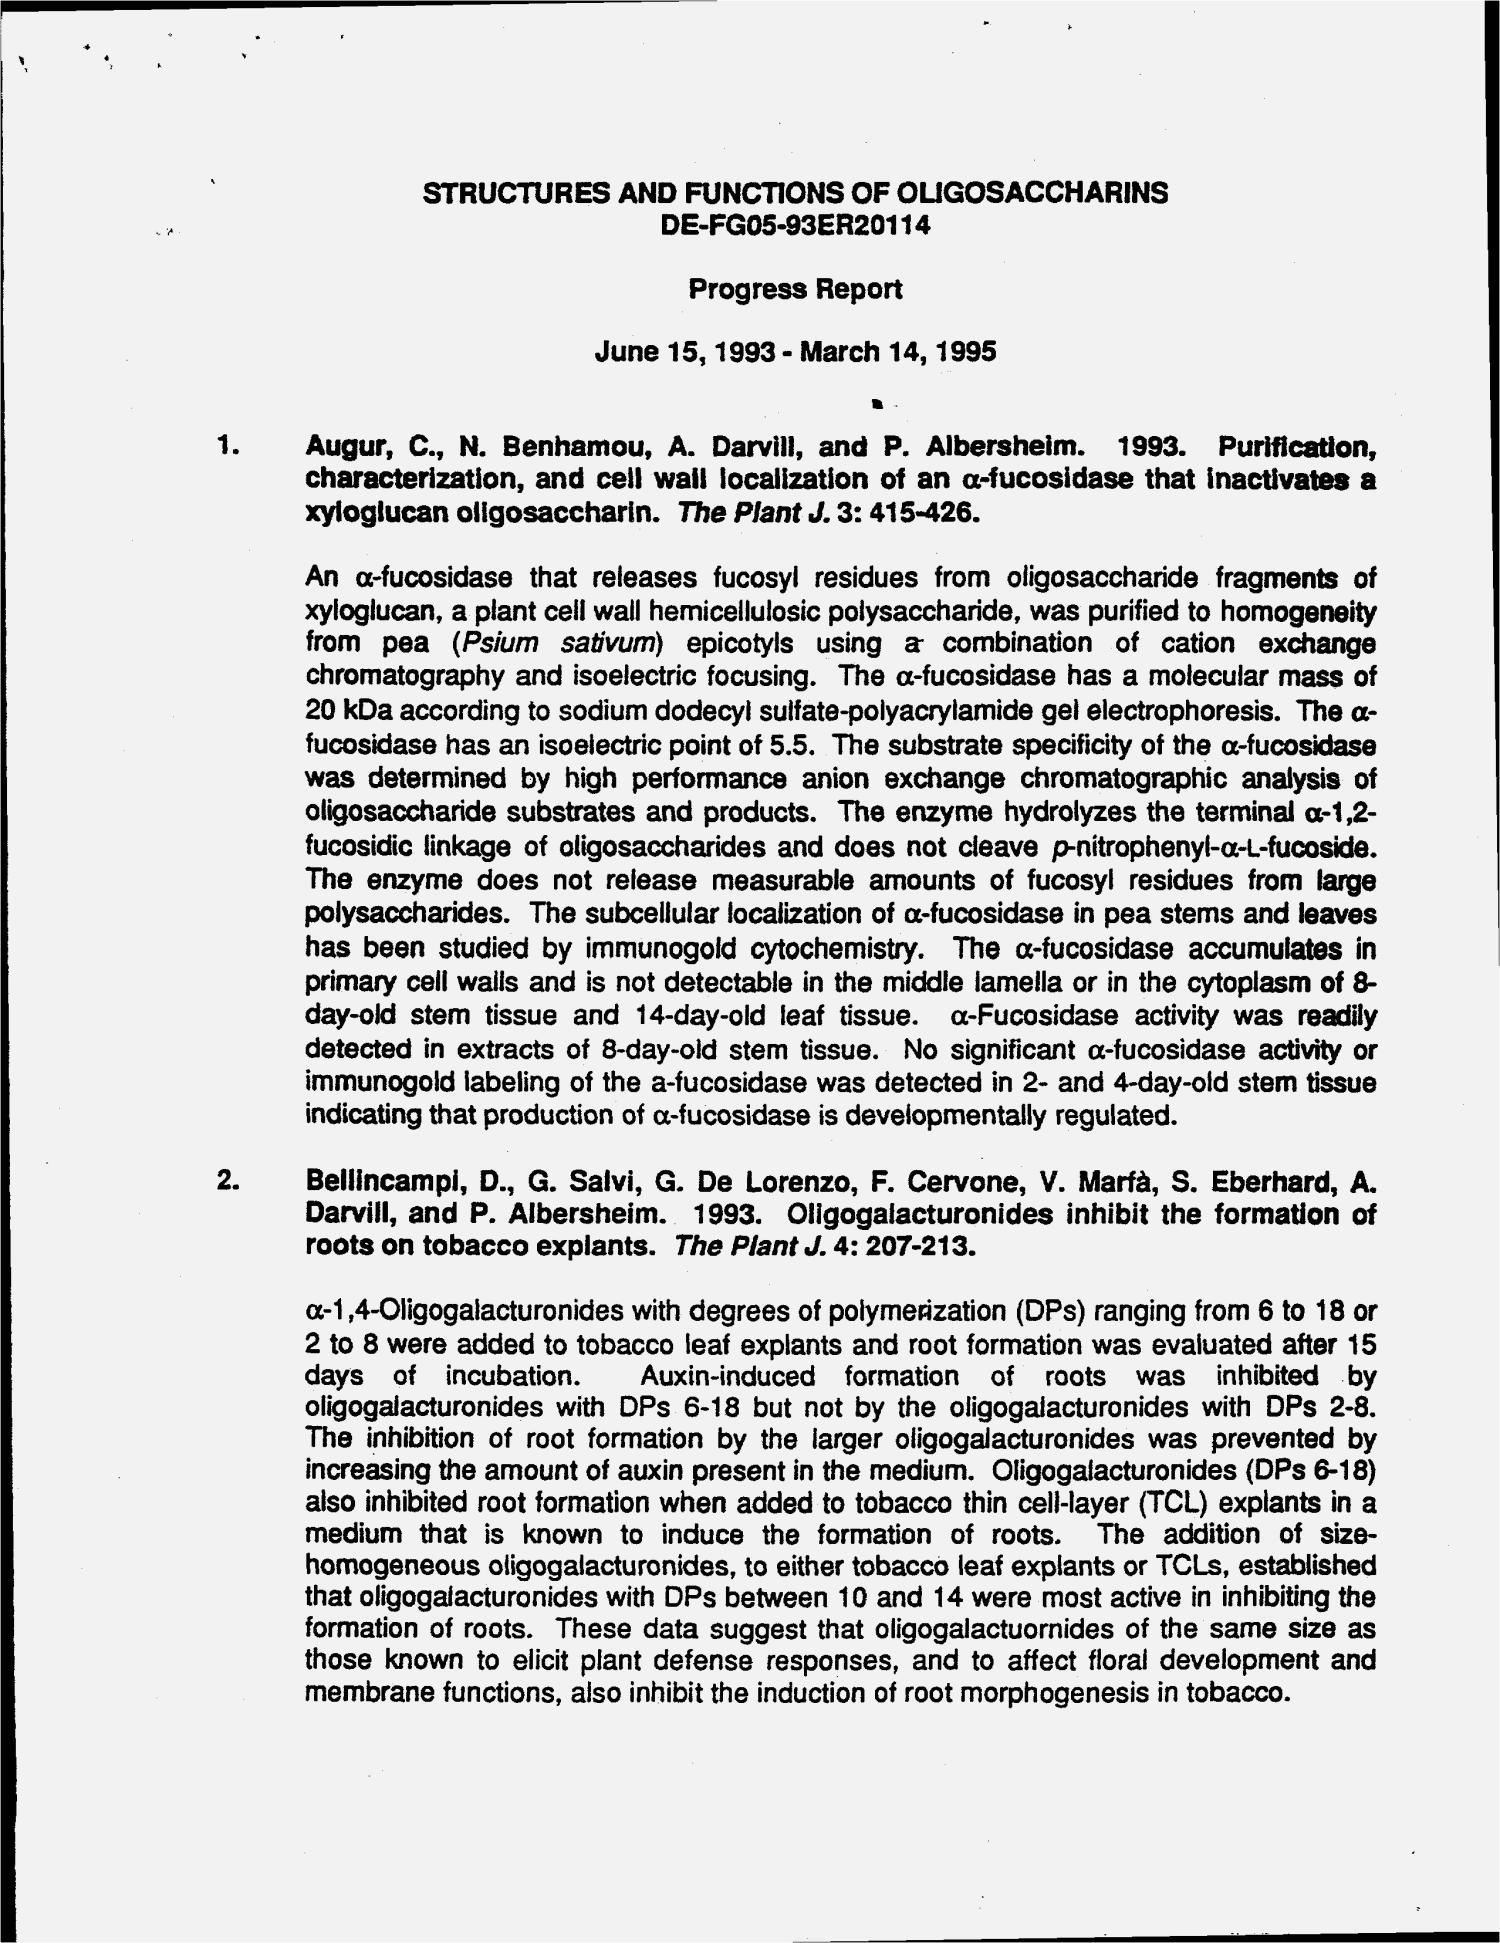 Structures and functions of oligosaccharins. Progress report, June 15, 1993--March 14, 1995
                                                
                                                    [Sequence #]: 4 of 8
                                                